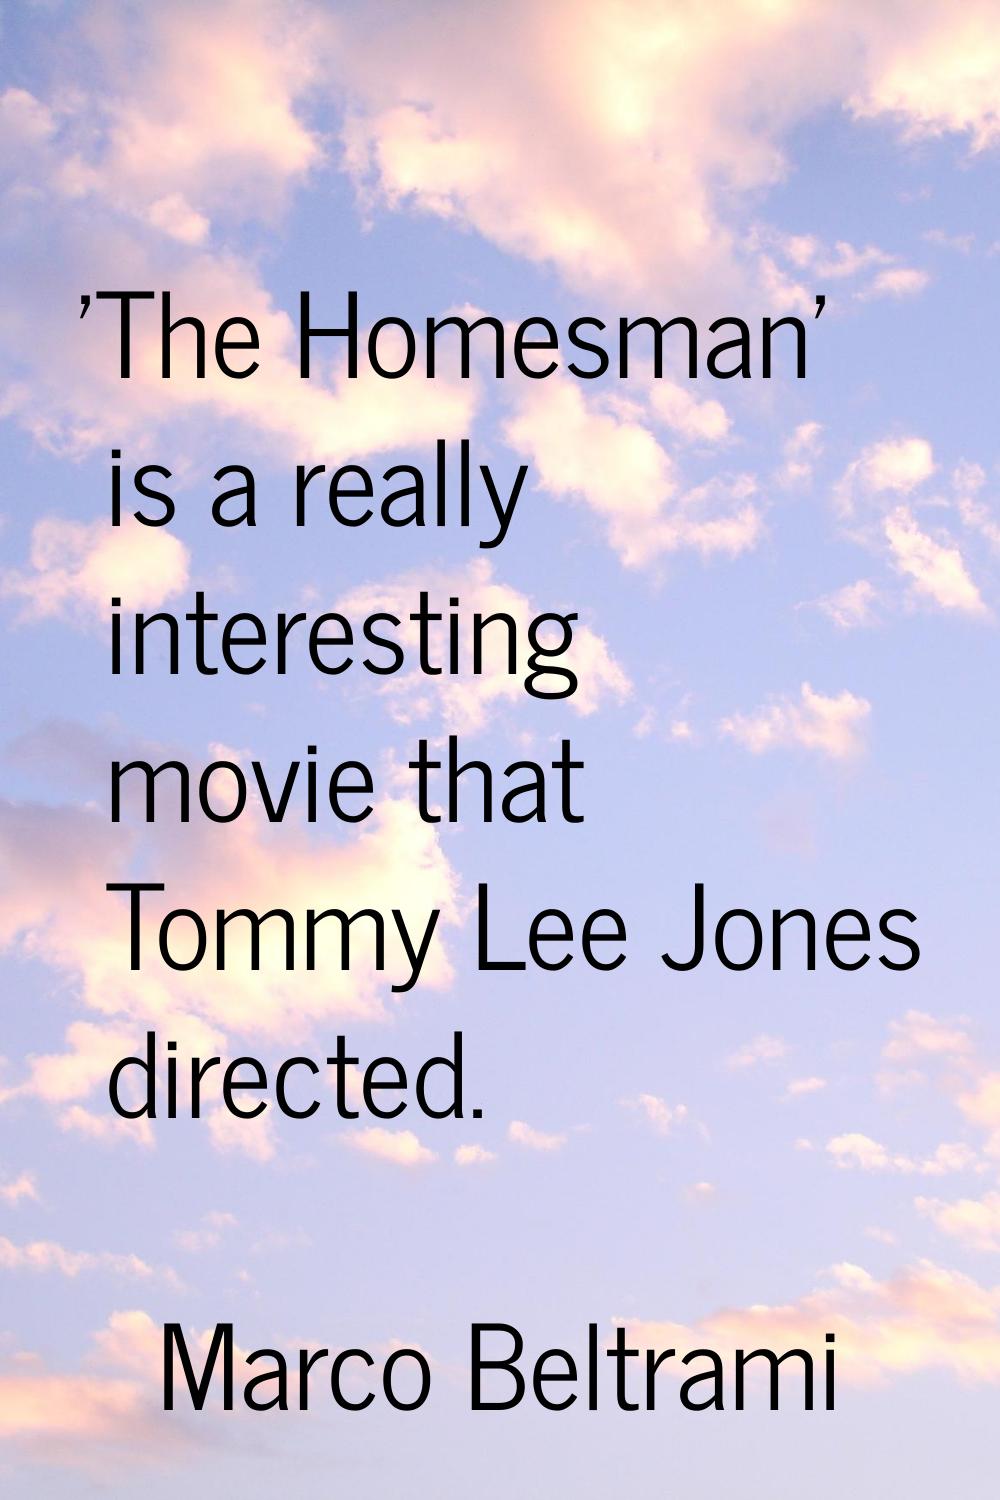 'The Homesman' is a really interesting movie that Tommy Lee Jones directed.